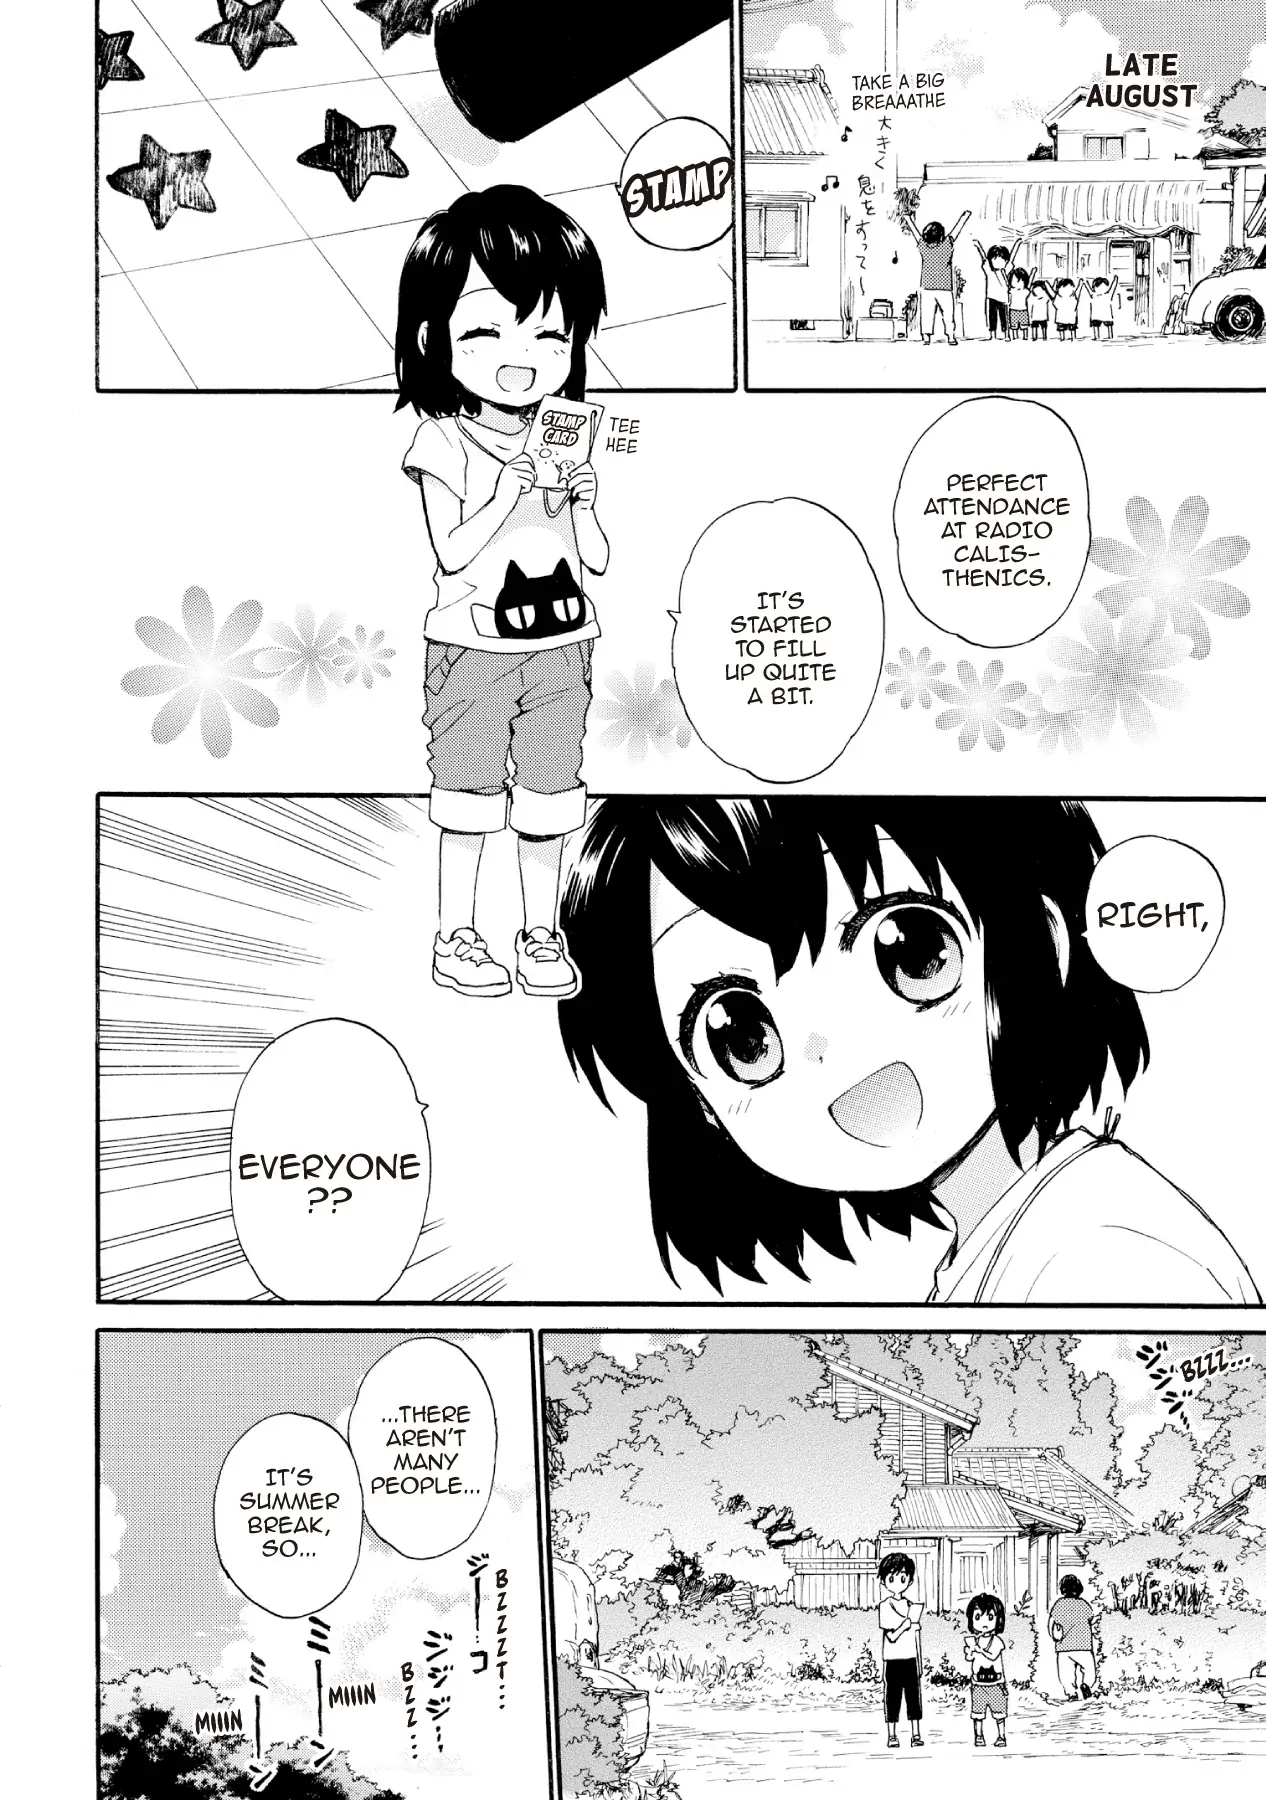 The Cute Little Granny Girl Hinata-chan - chapter 64 - #2